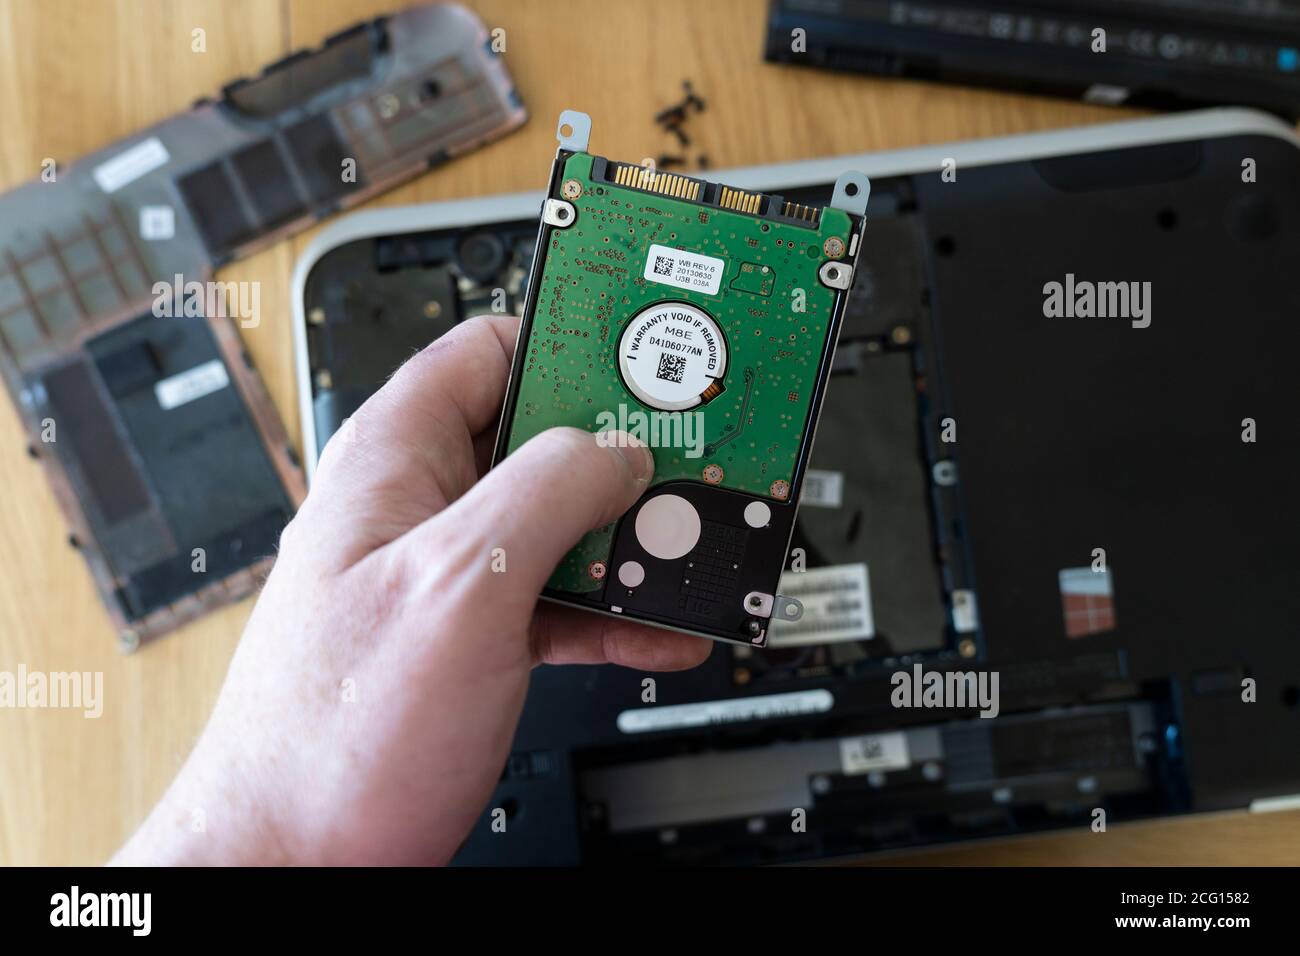 Man's hand holding a Seagate 2.5' hard disk drive (HDD) removed from a laptop. Theme: data storage, computer repair, old technology superseded, memory Stock Photo